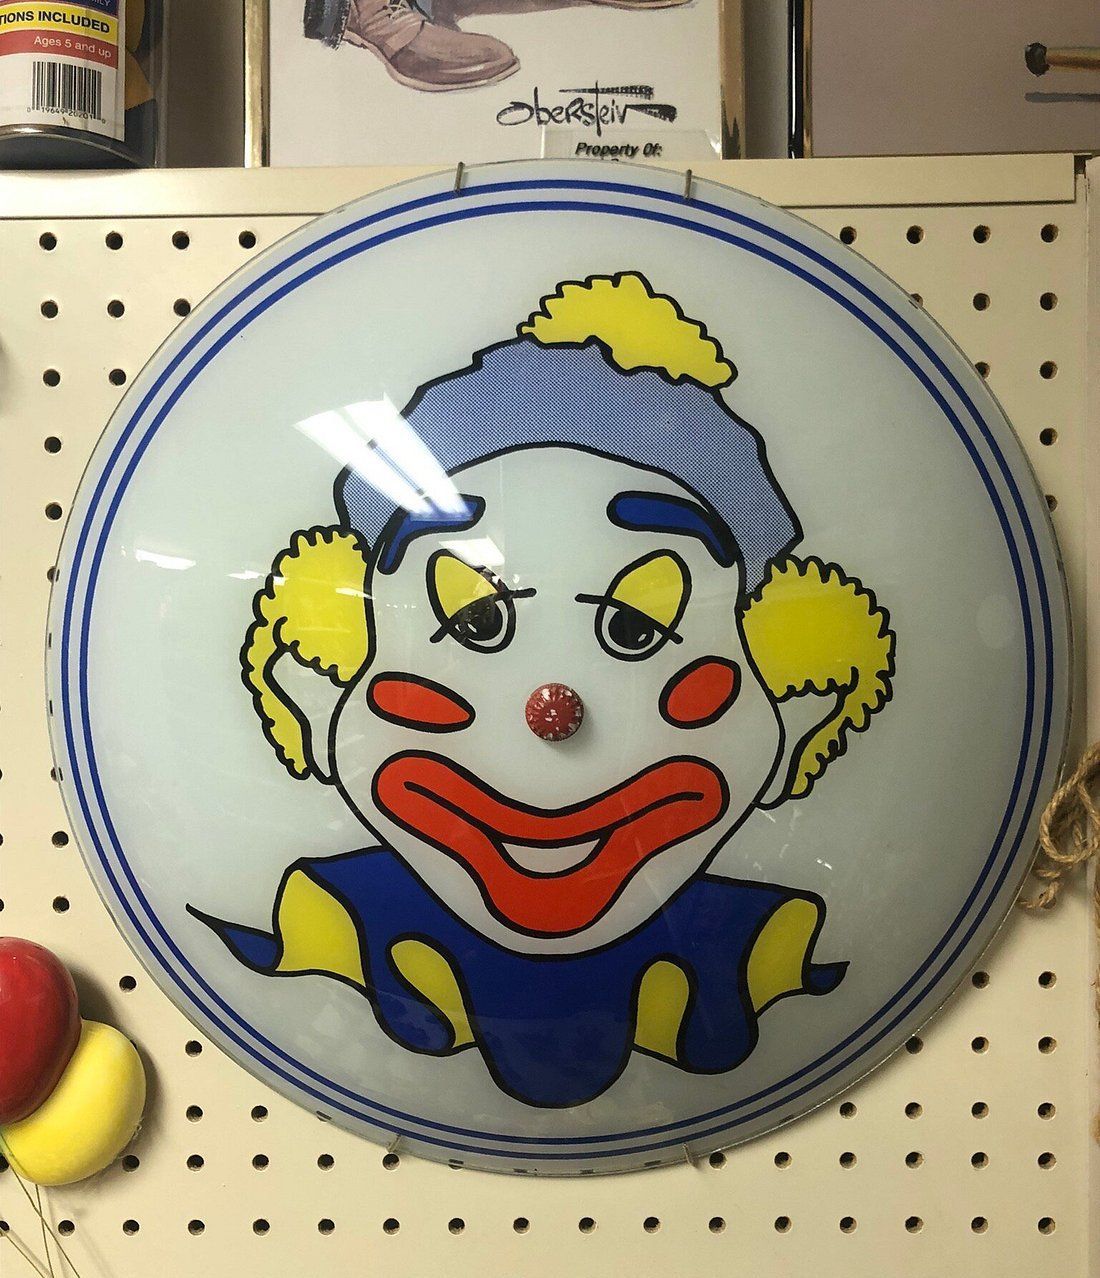 World's largest collection of clown related items: world record in Plainview, Nebraska